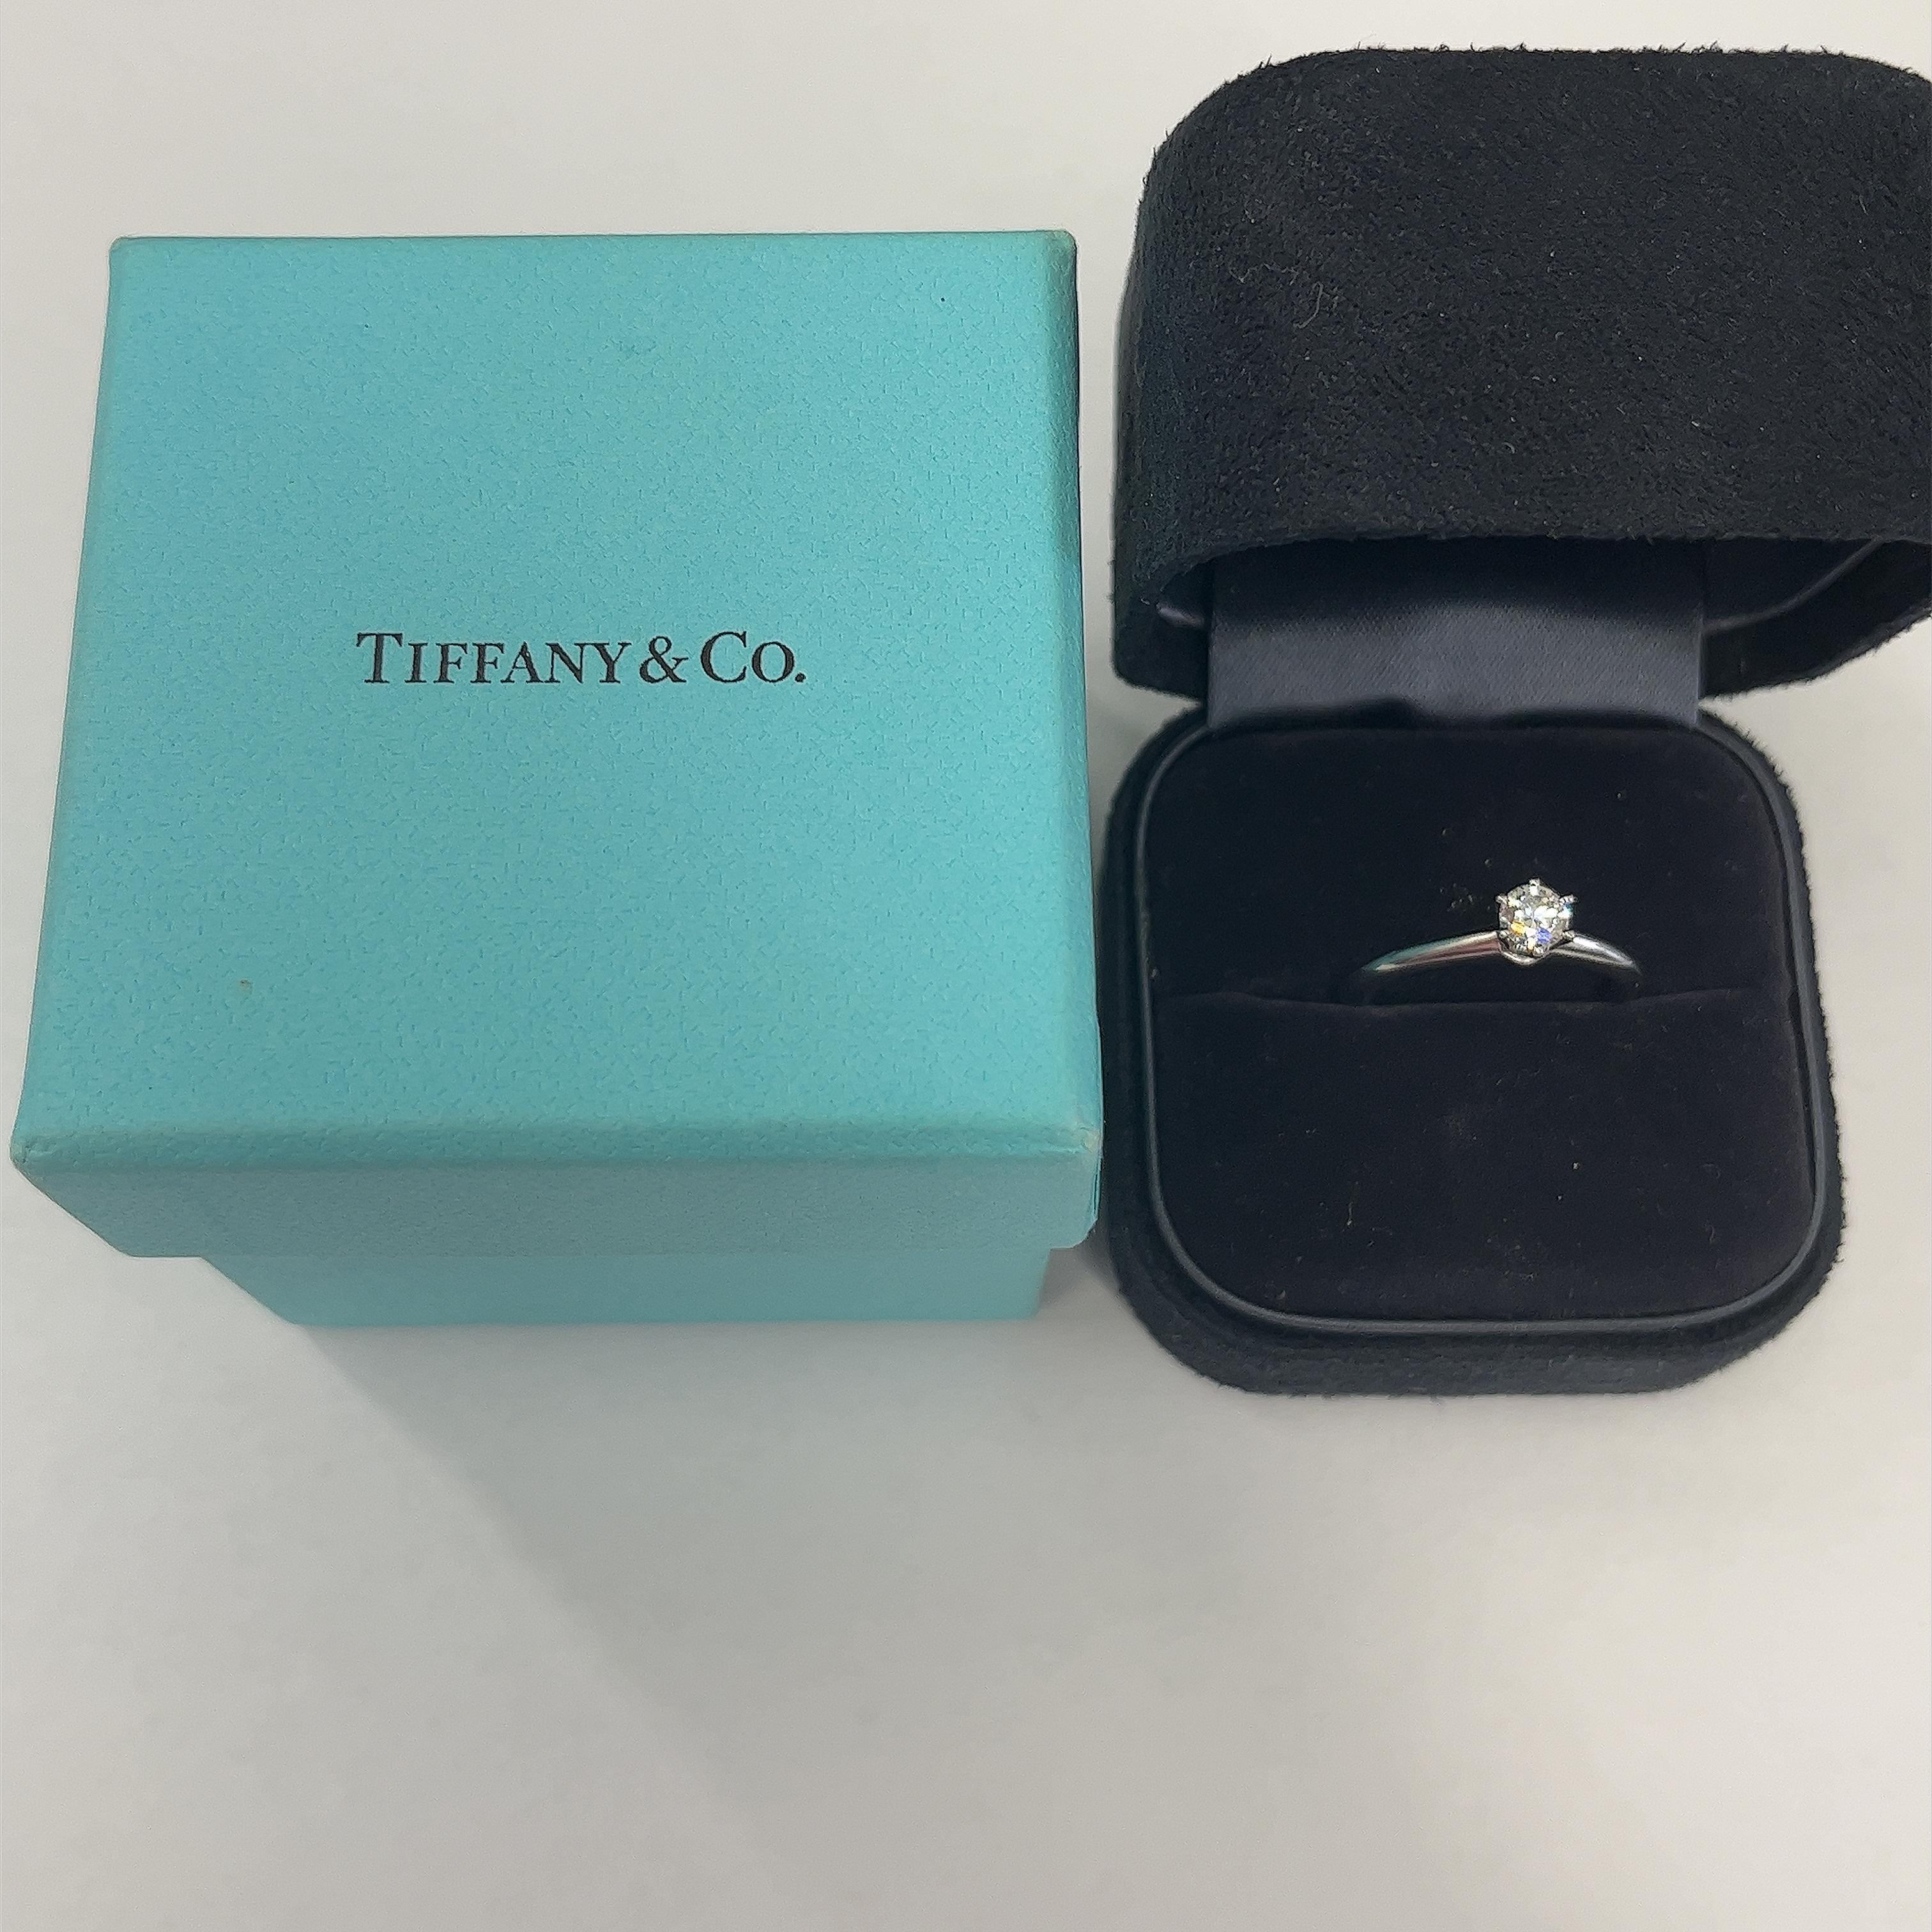 Tiffany & Co. Platinum Solitaire Diamond Engagement Ring 0.31ct E /IF Triple EX For Sale 2